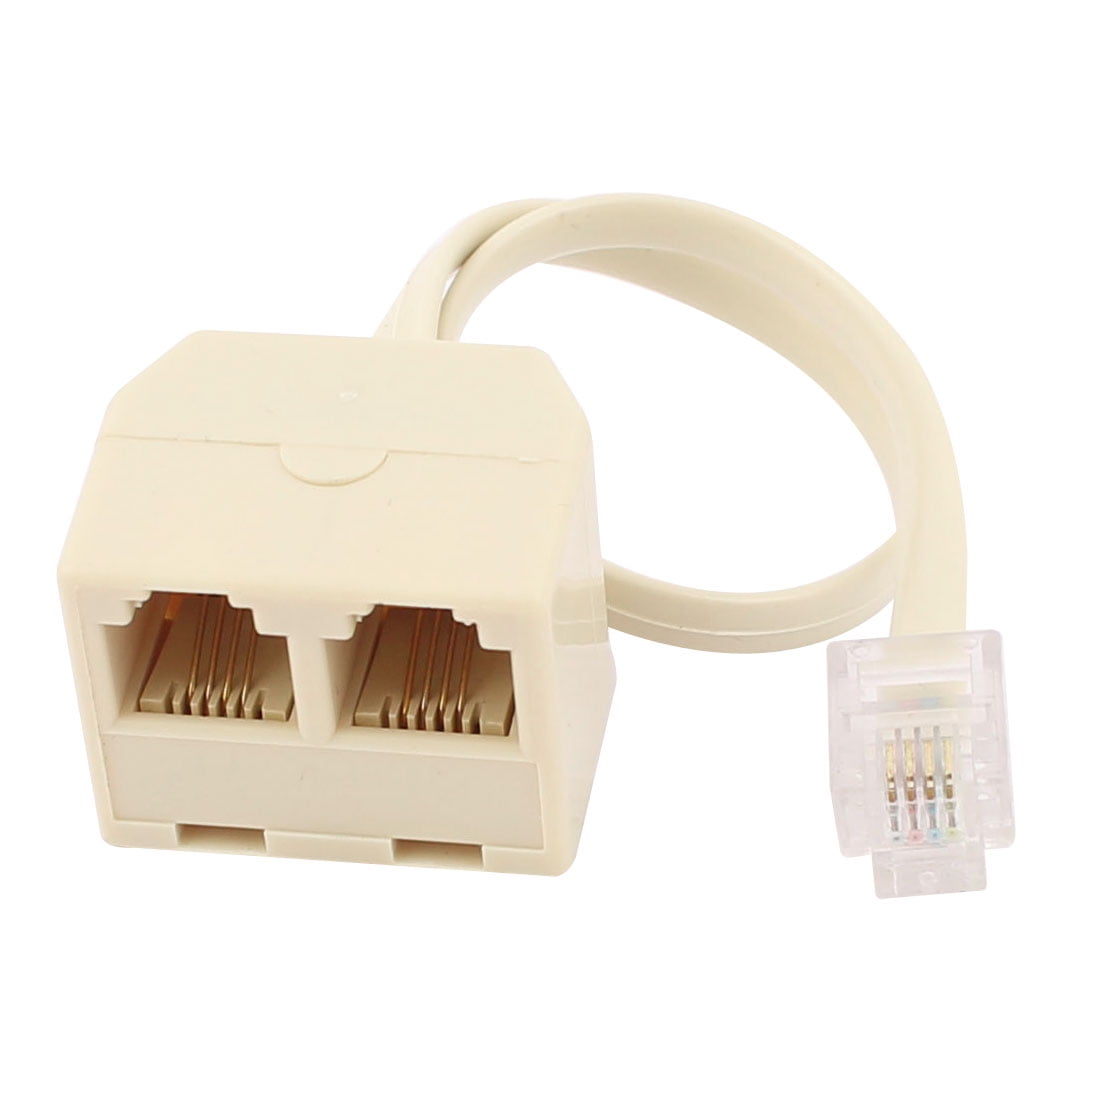 North fit systematic RJ11 6P4C 2 Way Outlet 1 to 2 Telephone Phone Jack Line Splitter Adapter  Beige - Walmart.com